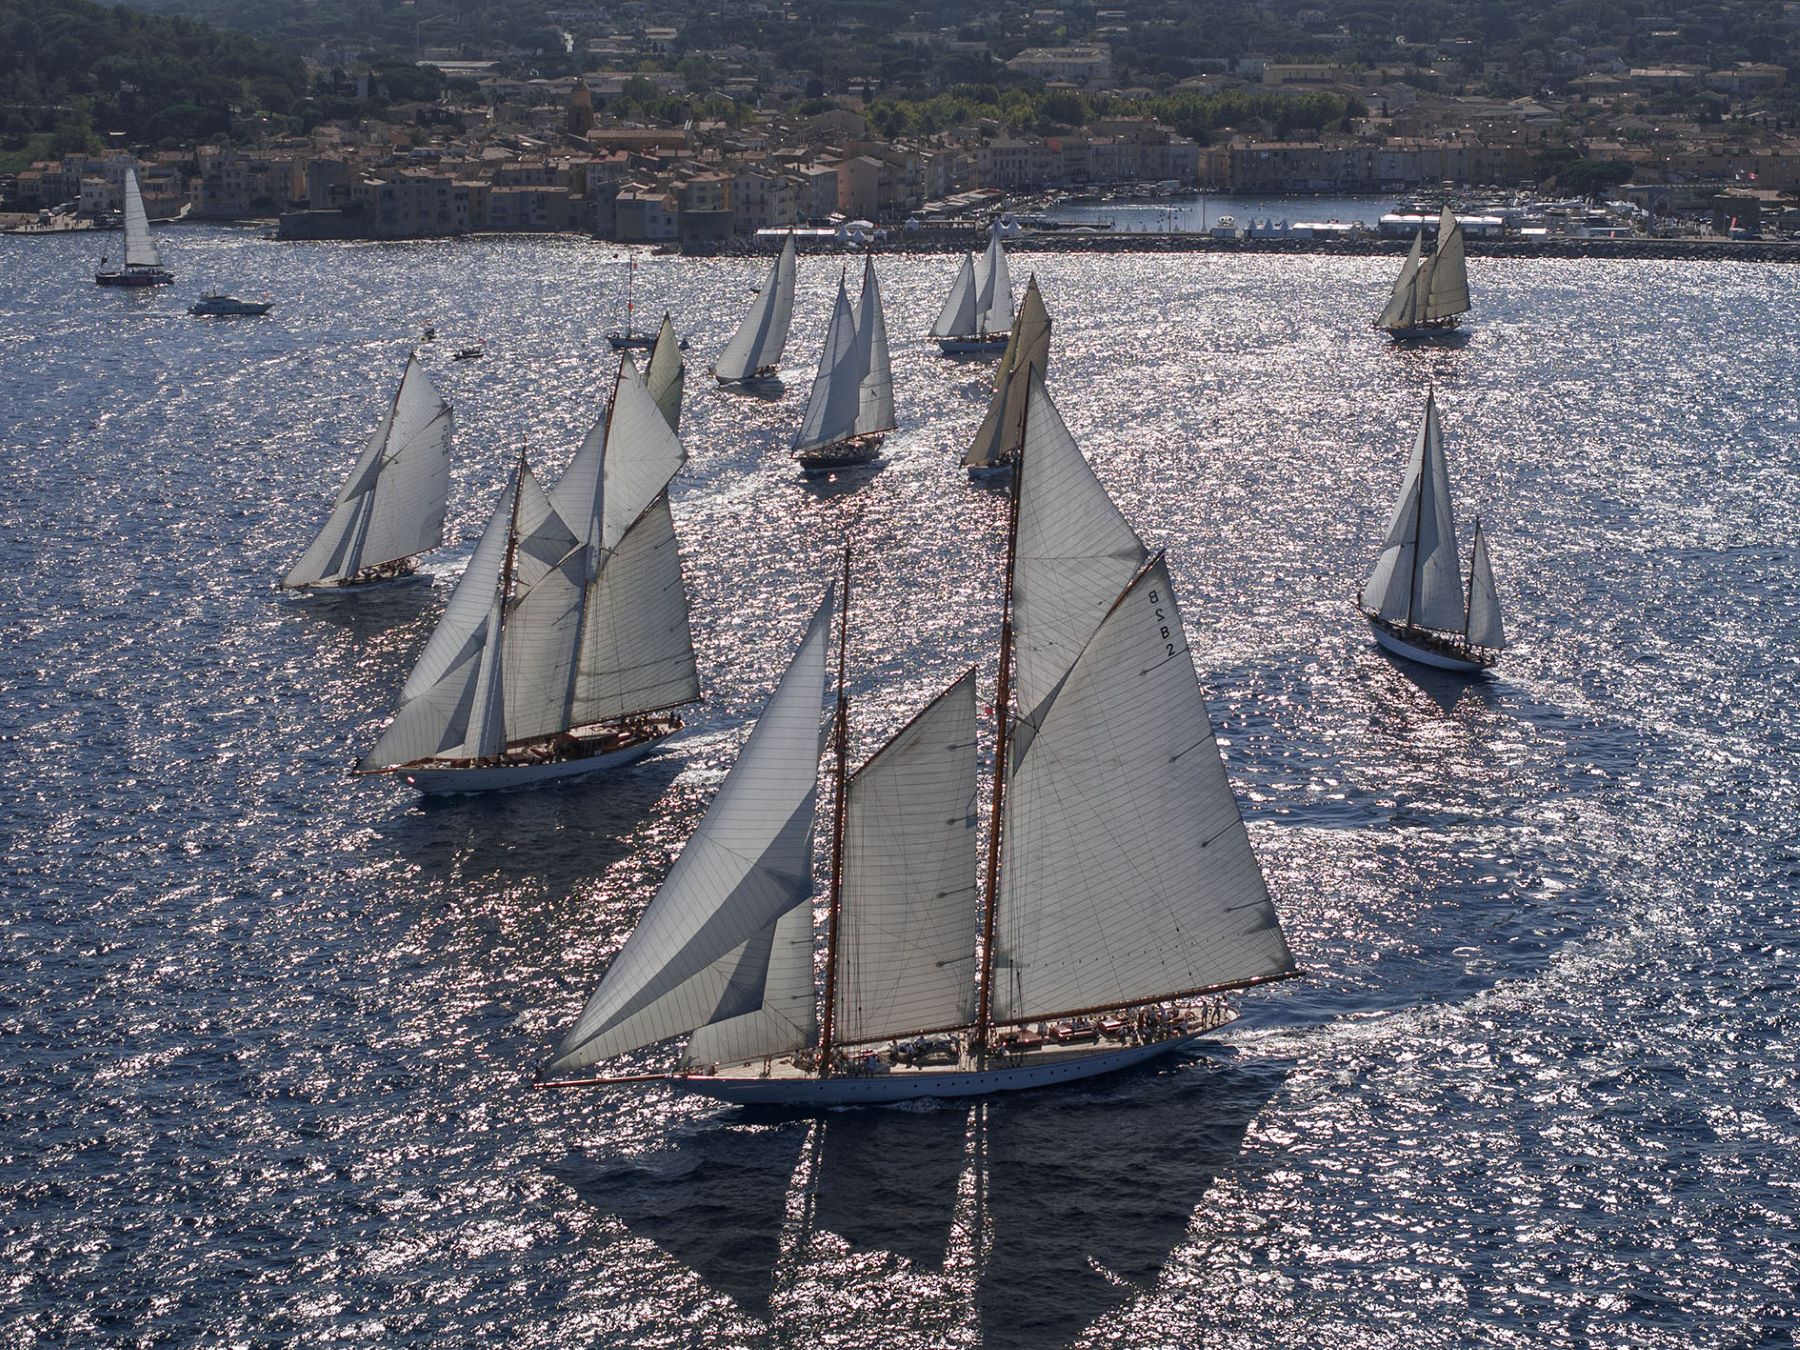 Quarter of a century next year, Les Voiles forever!